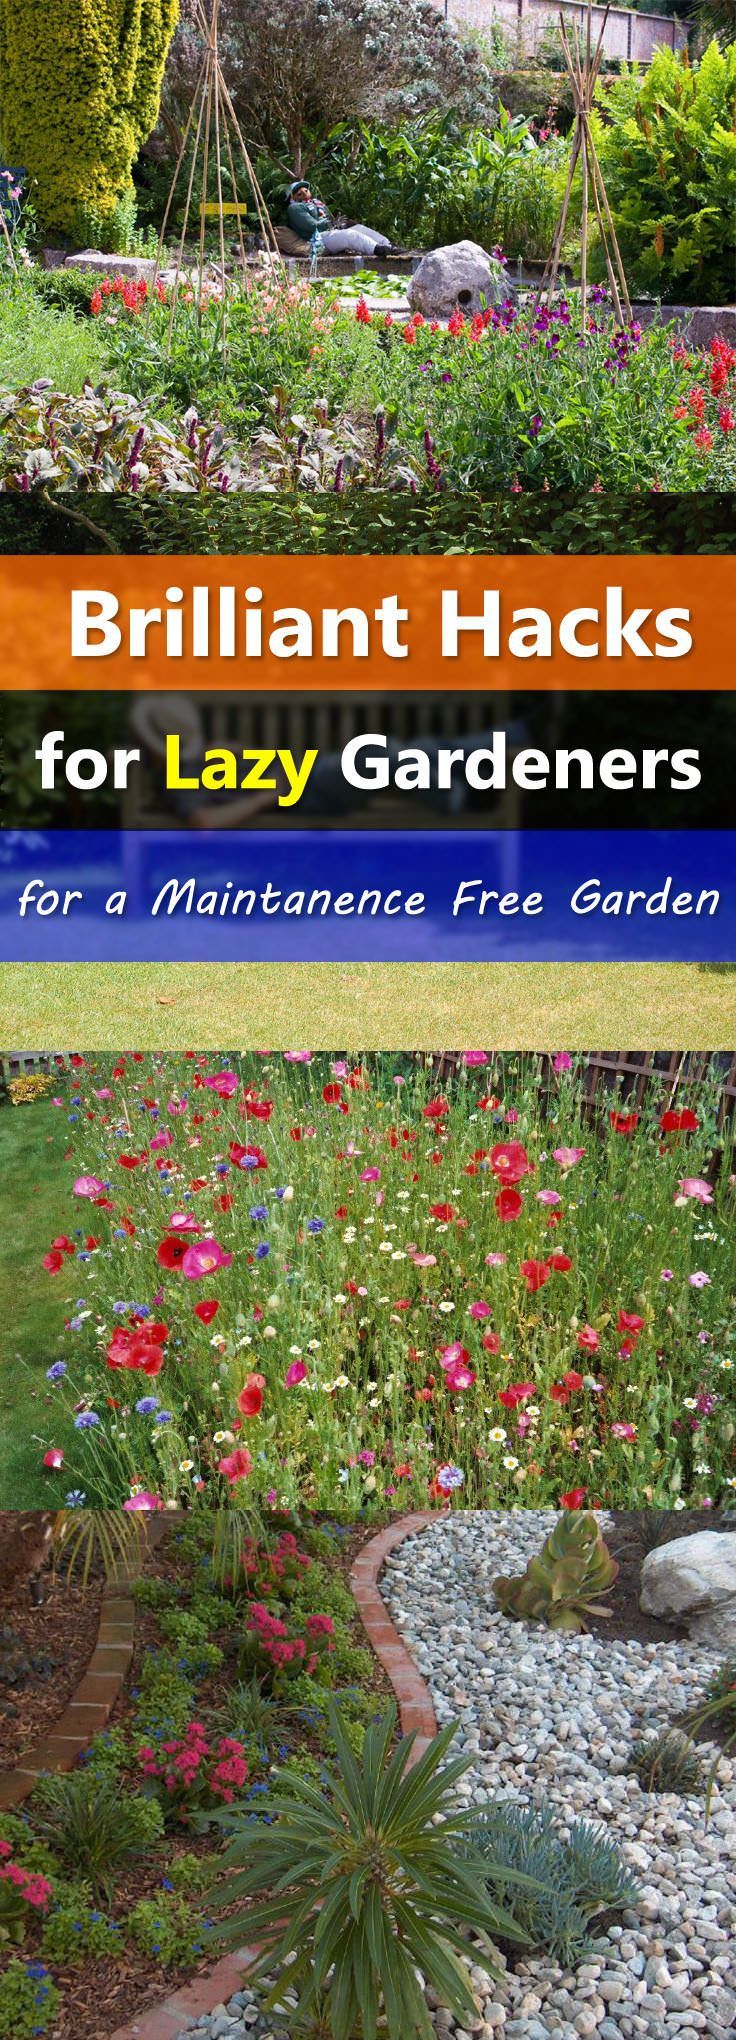 You love to garden but don’t find time to maintain it. Don’t bother, imply these easy landscaping tips to make a low maintenance